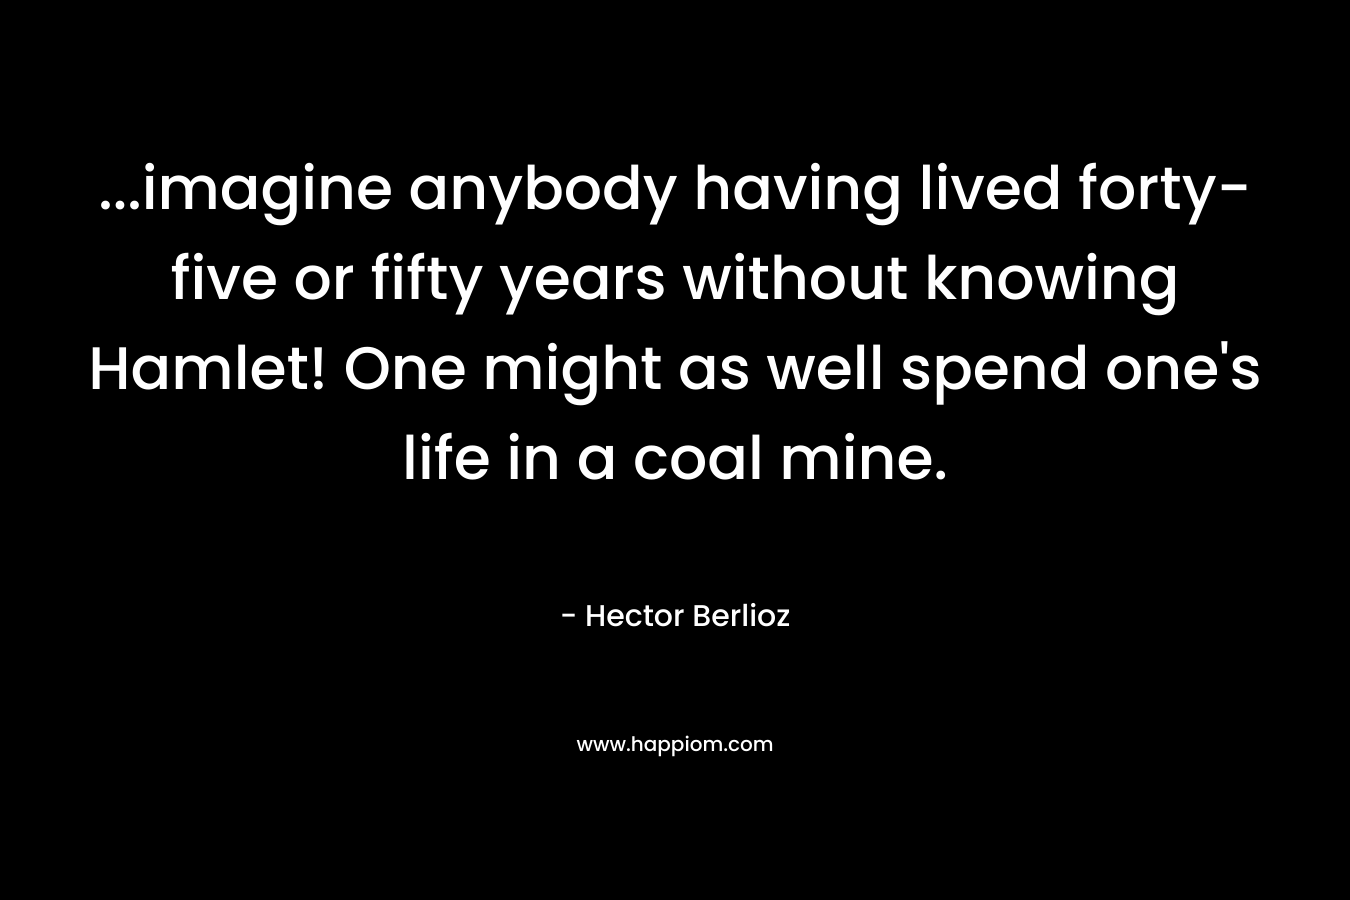 ...imagine anybody having lived forty-five or fifty years without knowing Hamlet! One might as well spend one's life in a coal mine.